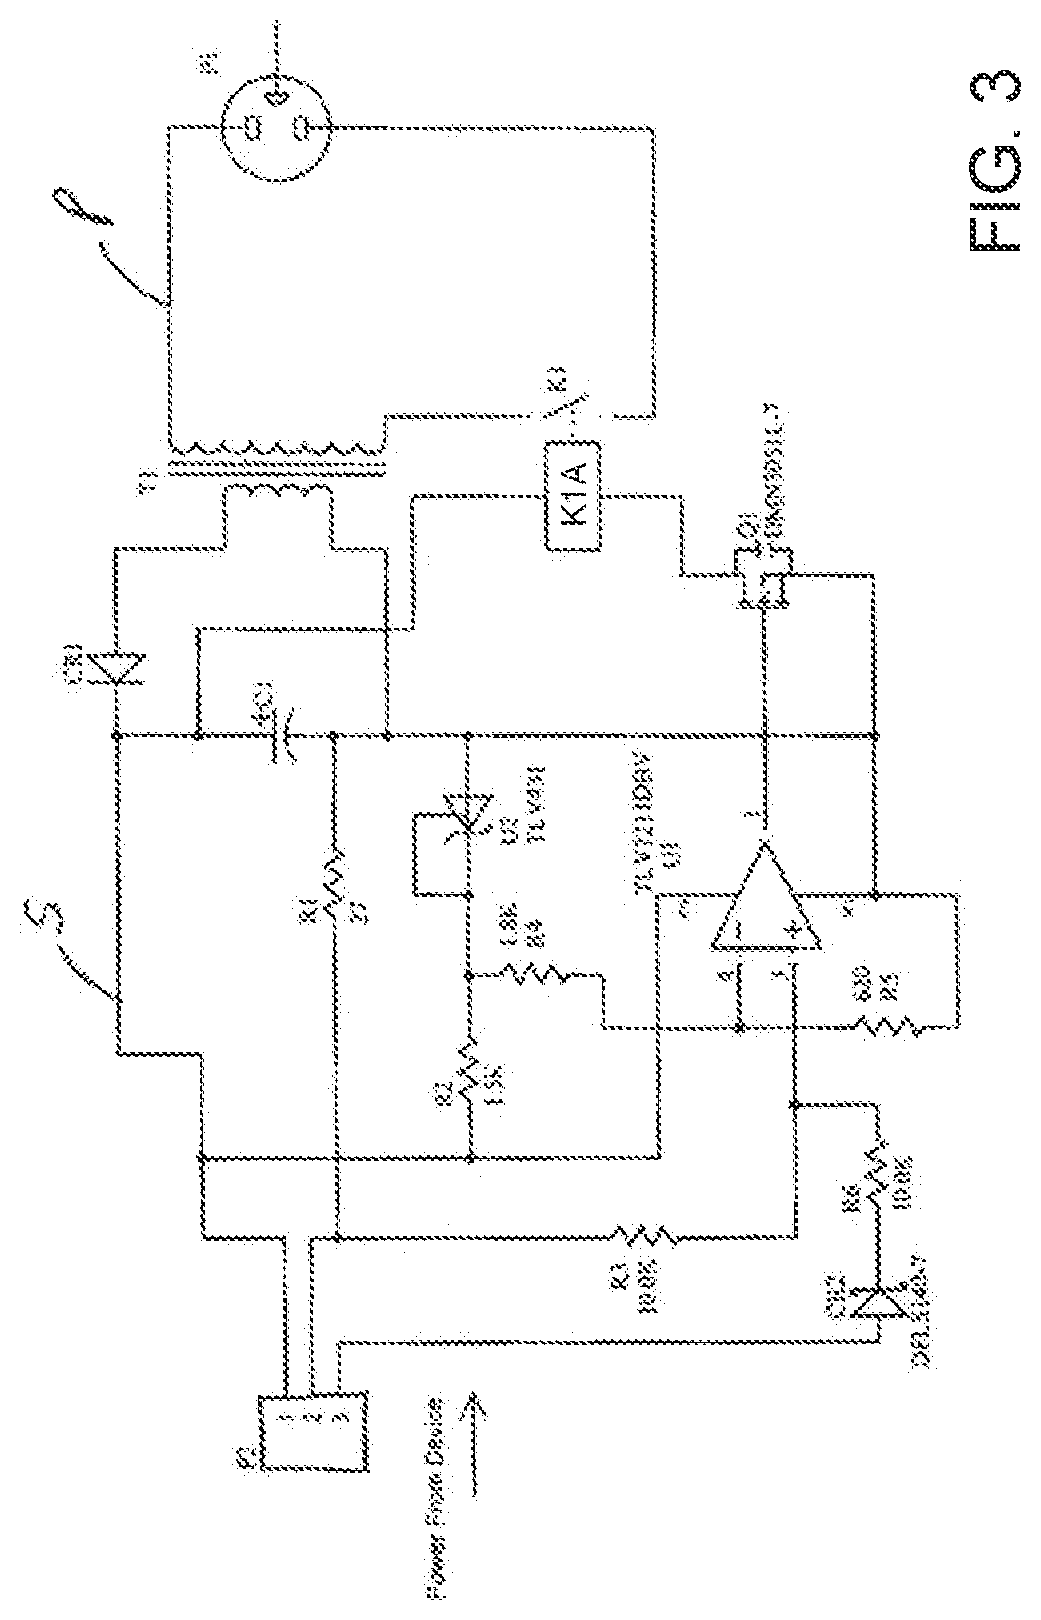 Current sensing circuit disconnect device and method